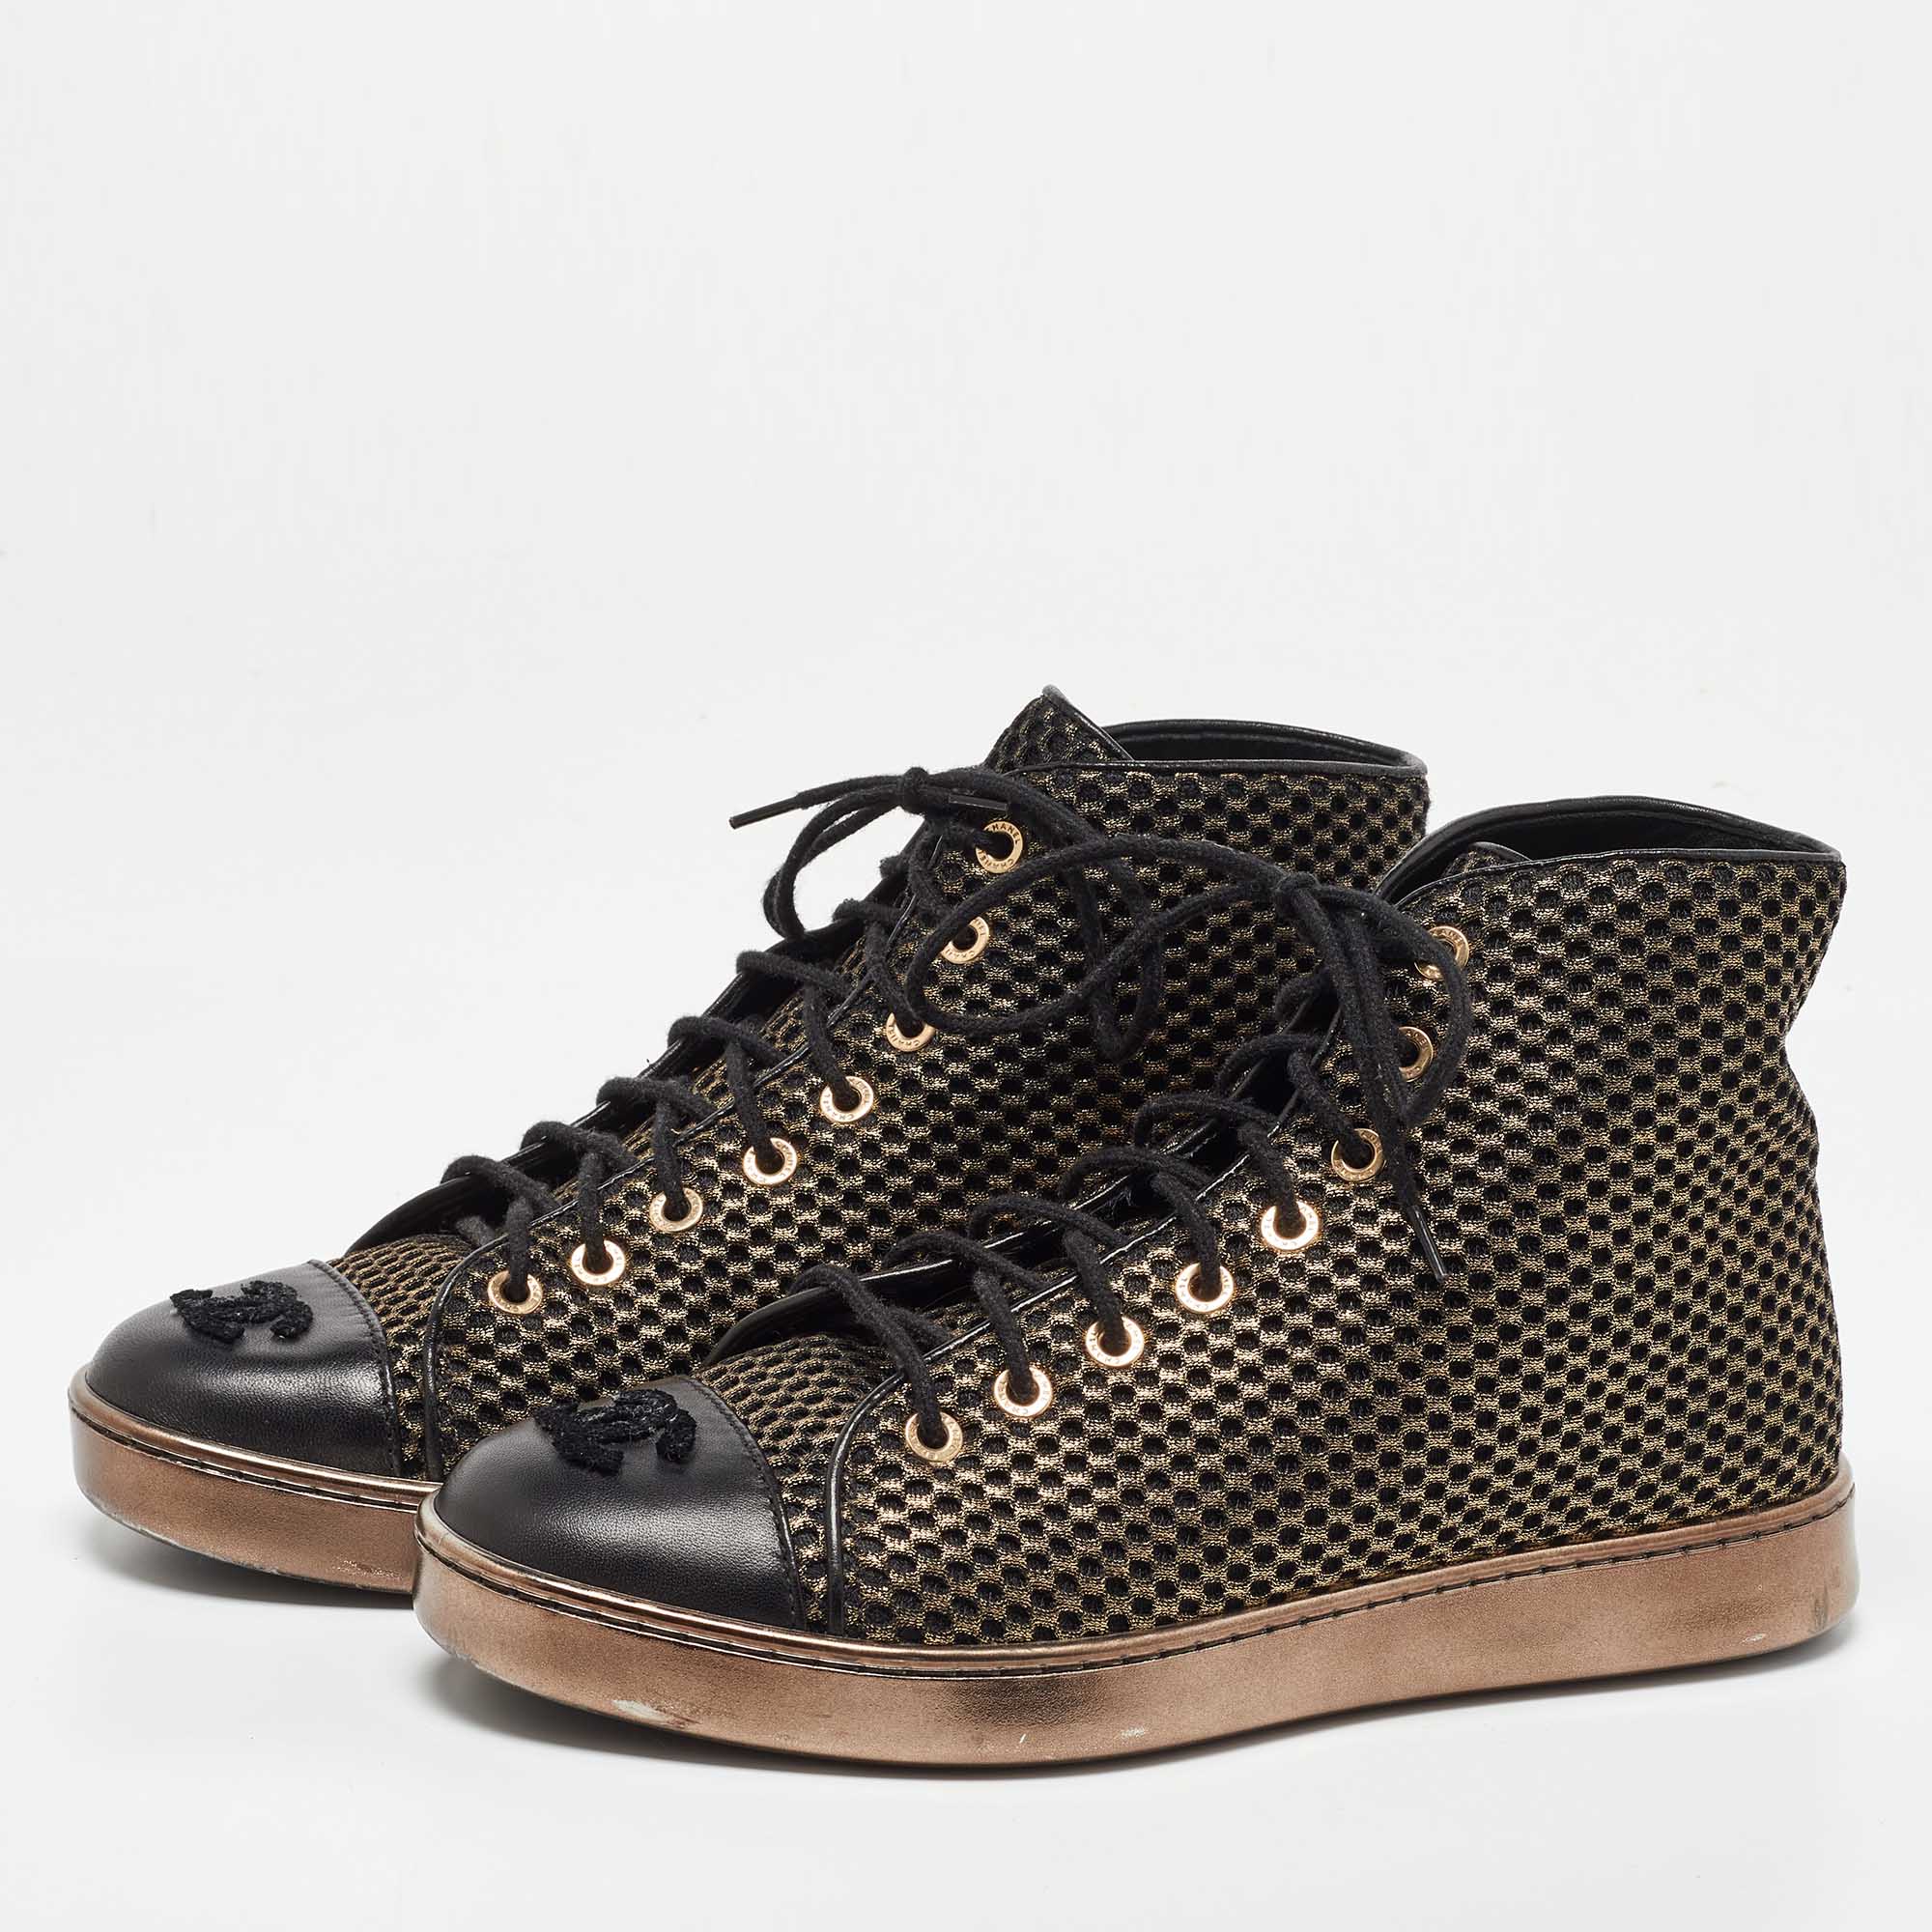 

Chanel Metallic Gold/Black Mesh and Leather CC High Top Sneakers Size